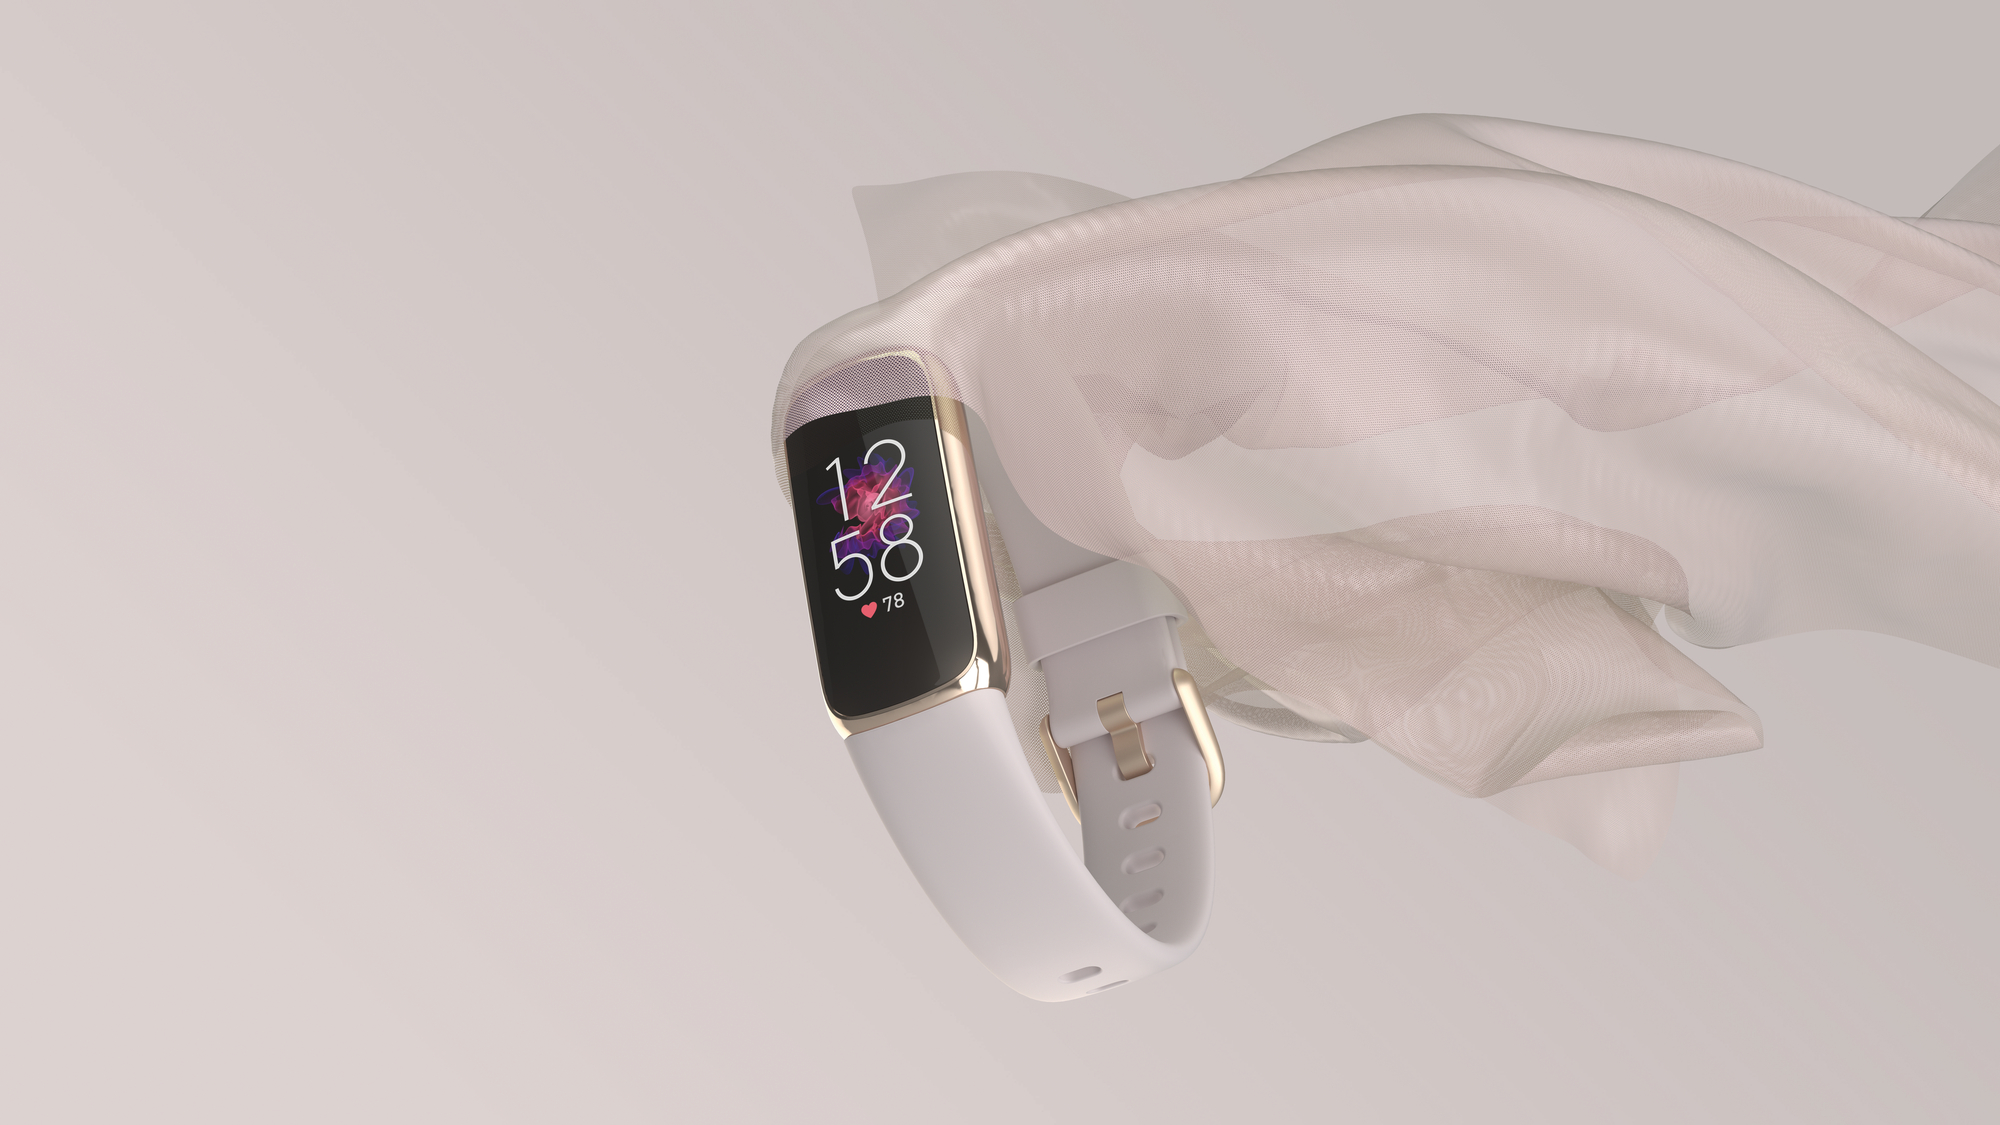 Fitbit announces new style-focused Luxe smartband | Ars Technica